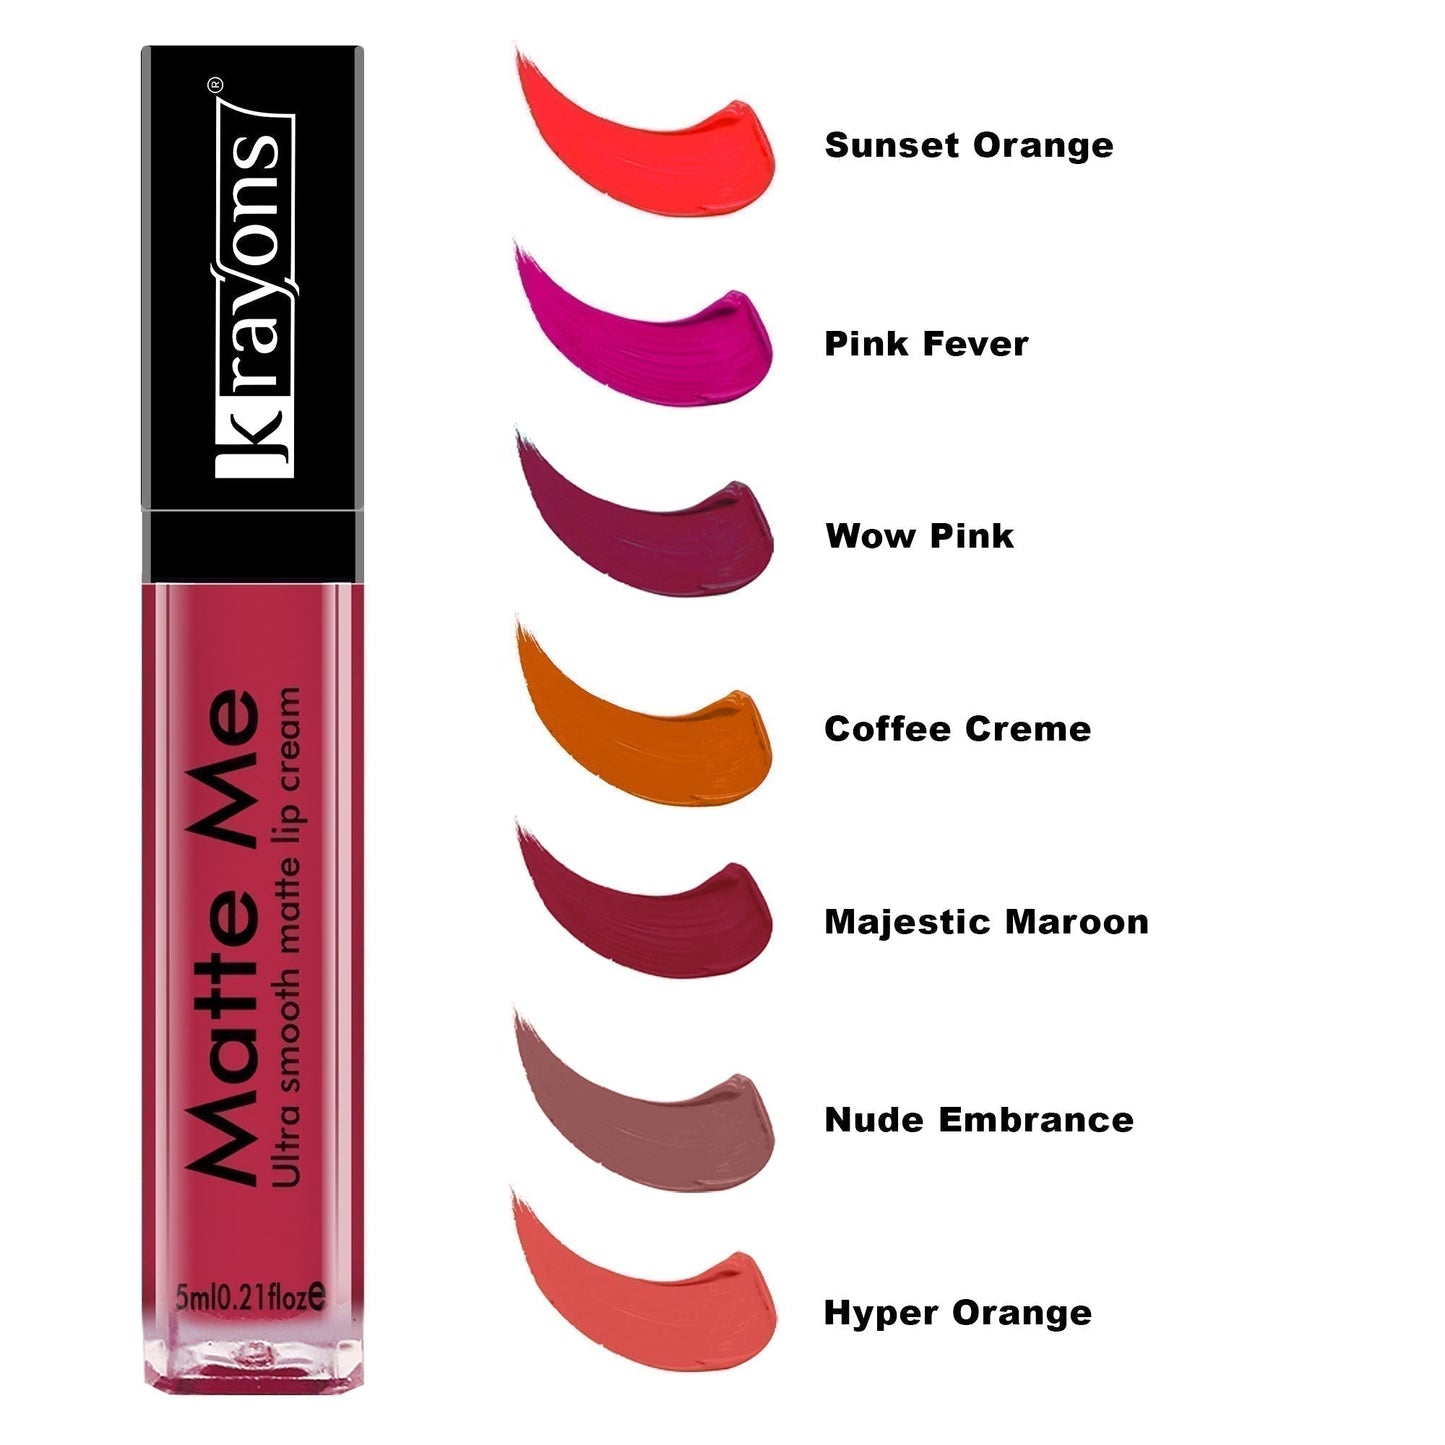 Krayons Matte Me Ultra Smooth Matte Liquid Lip Color, Mask Proof, Waterproof, Longlasting, 5ml Each, Combo, Pack of 3 (Sunset Orange, Pink Fever, Coffee Creme)